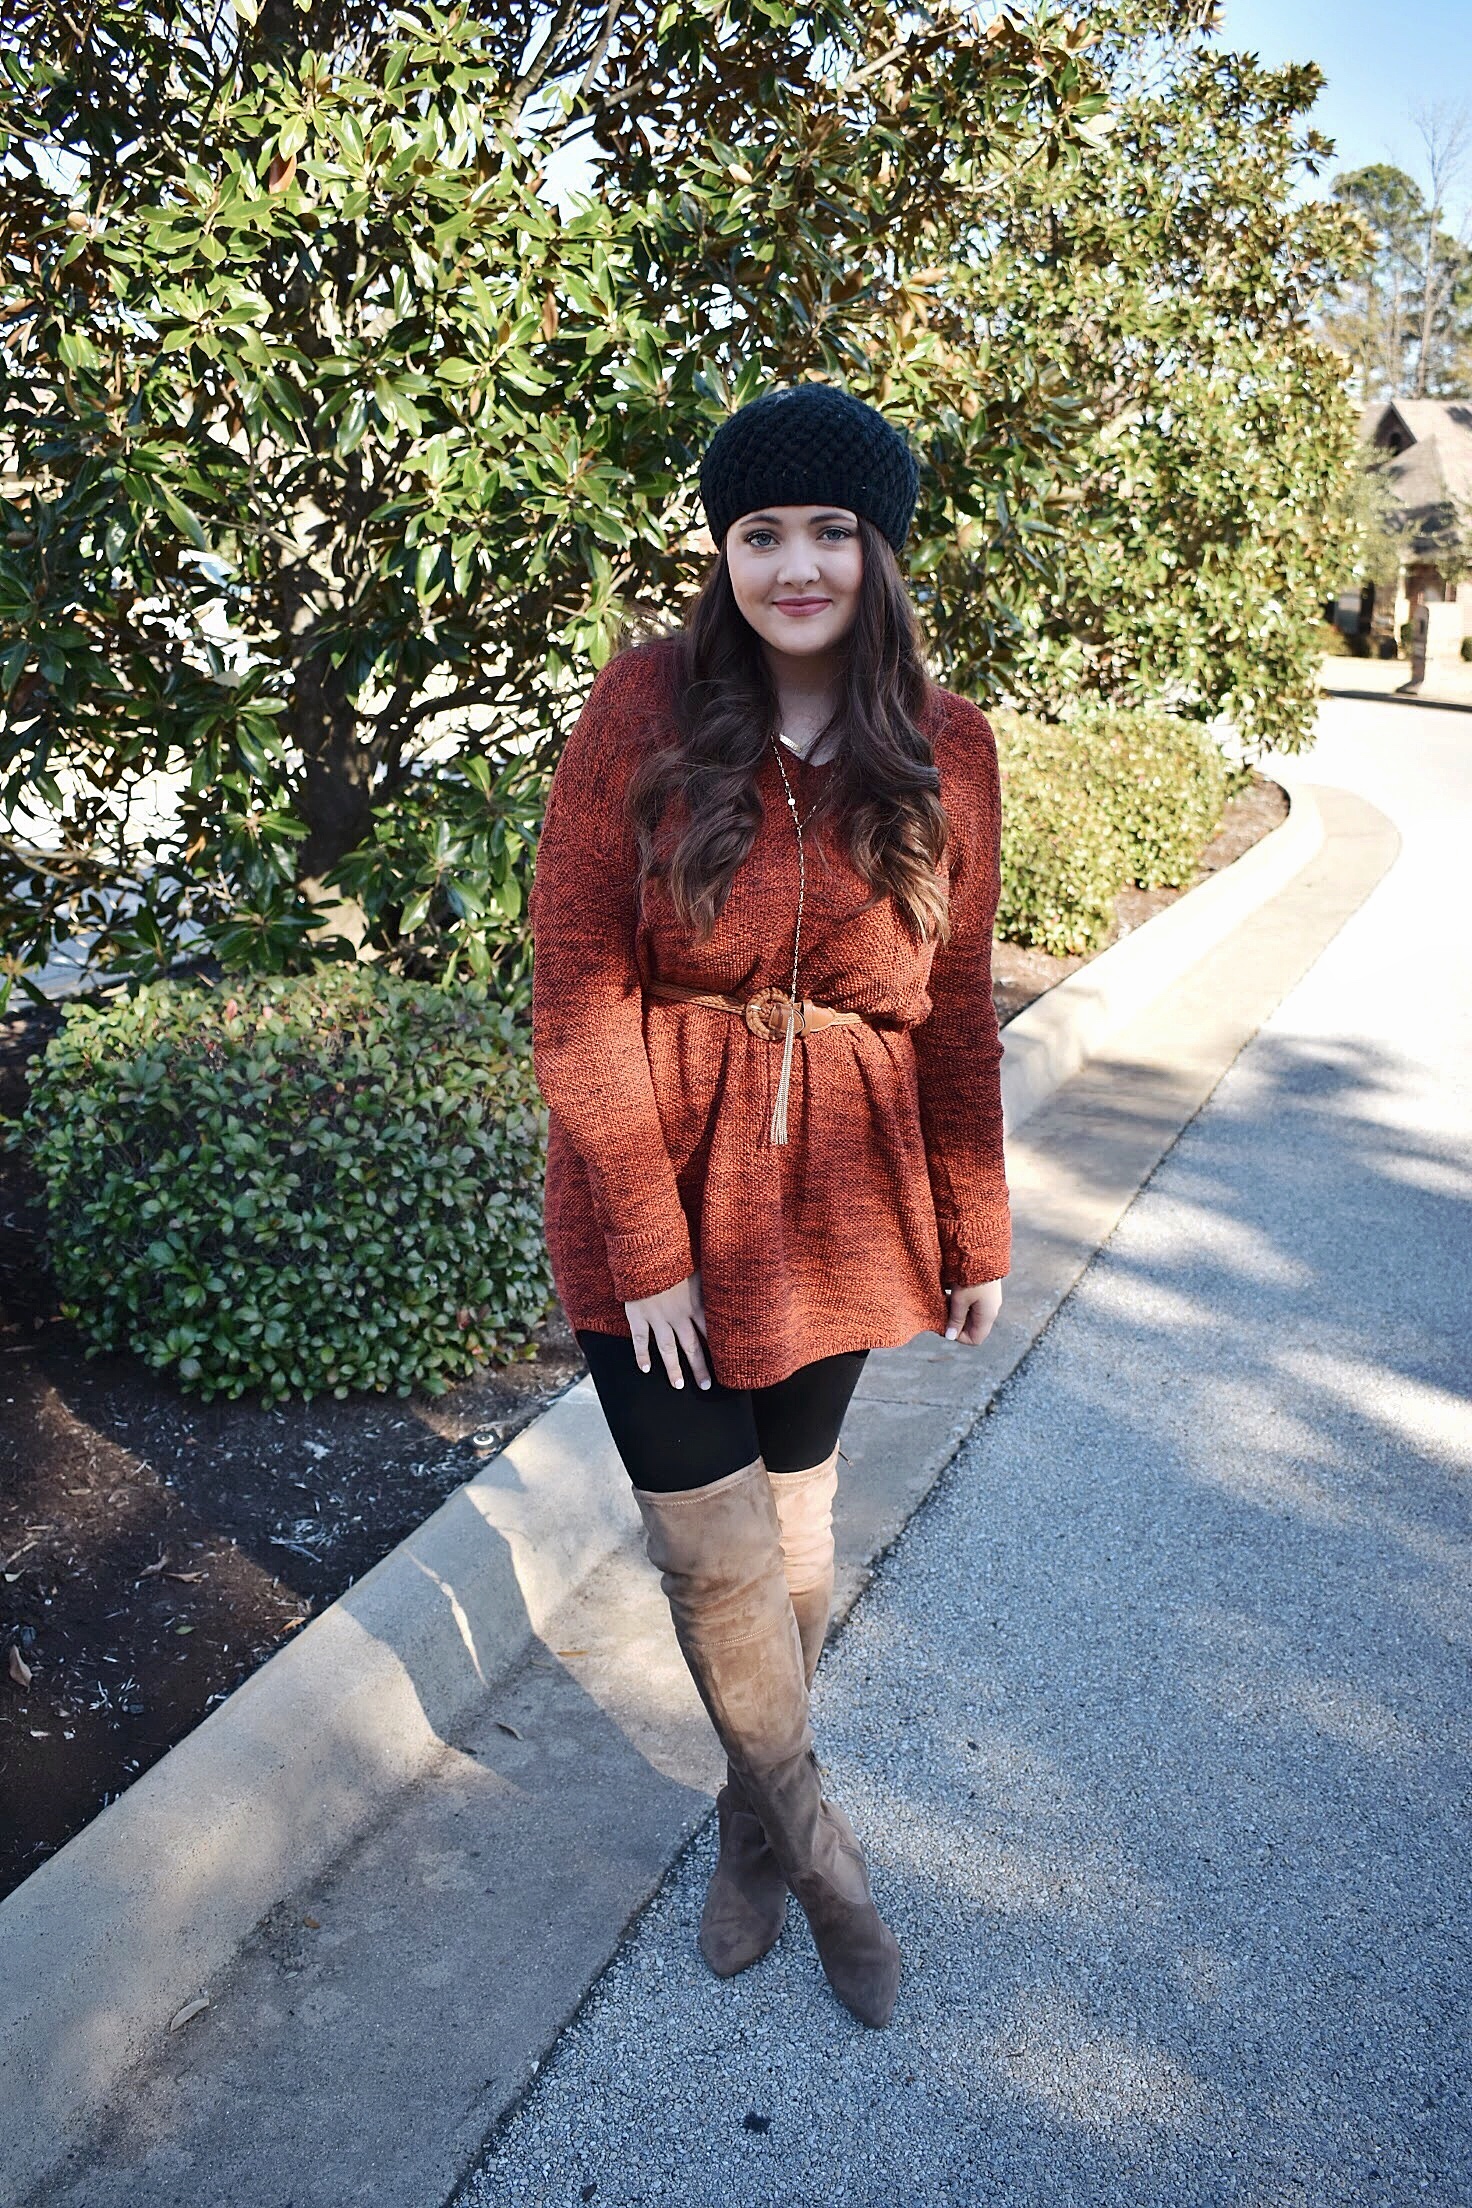 A Dressy Winter Look + How I Transformed This Sweater